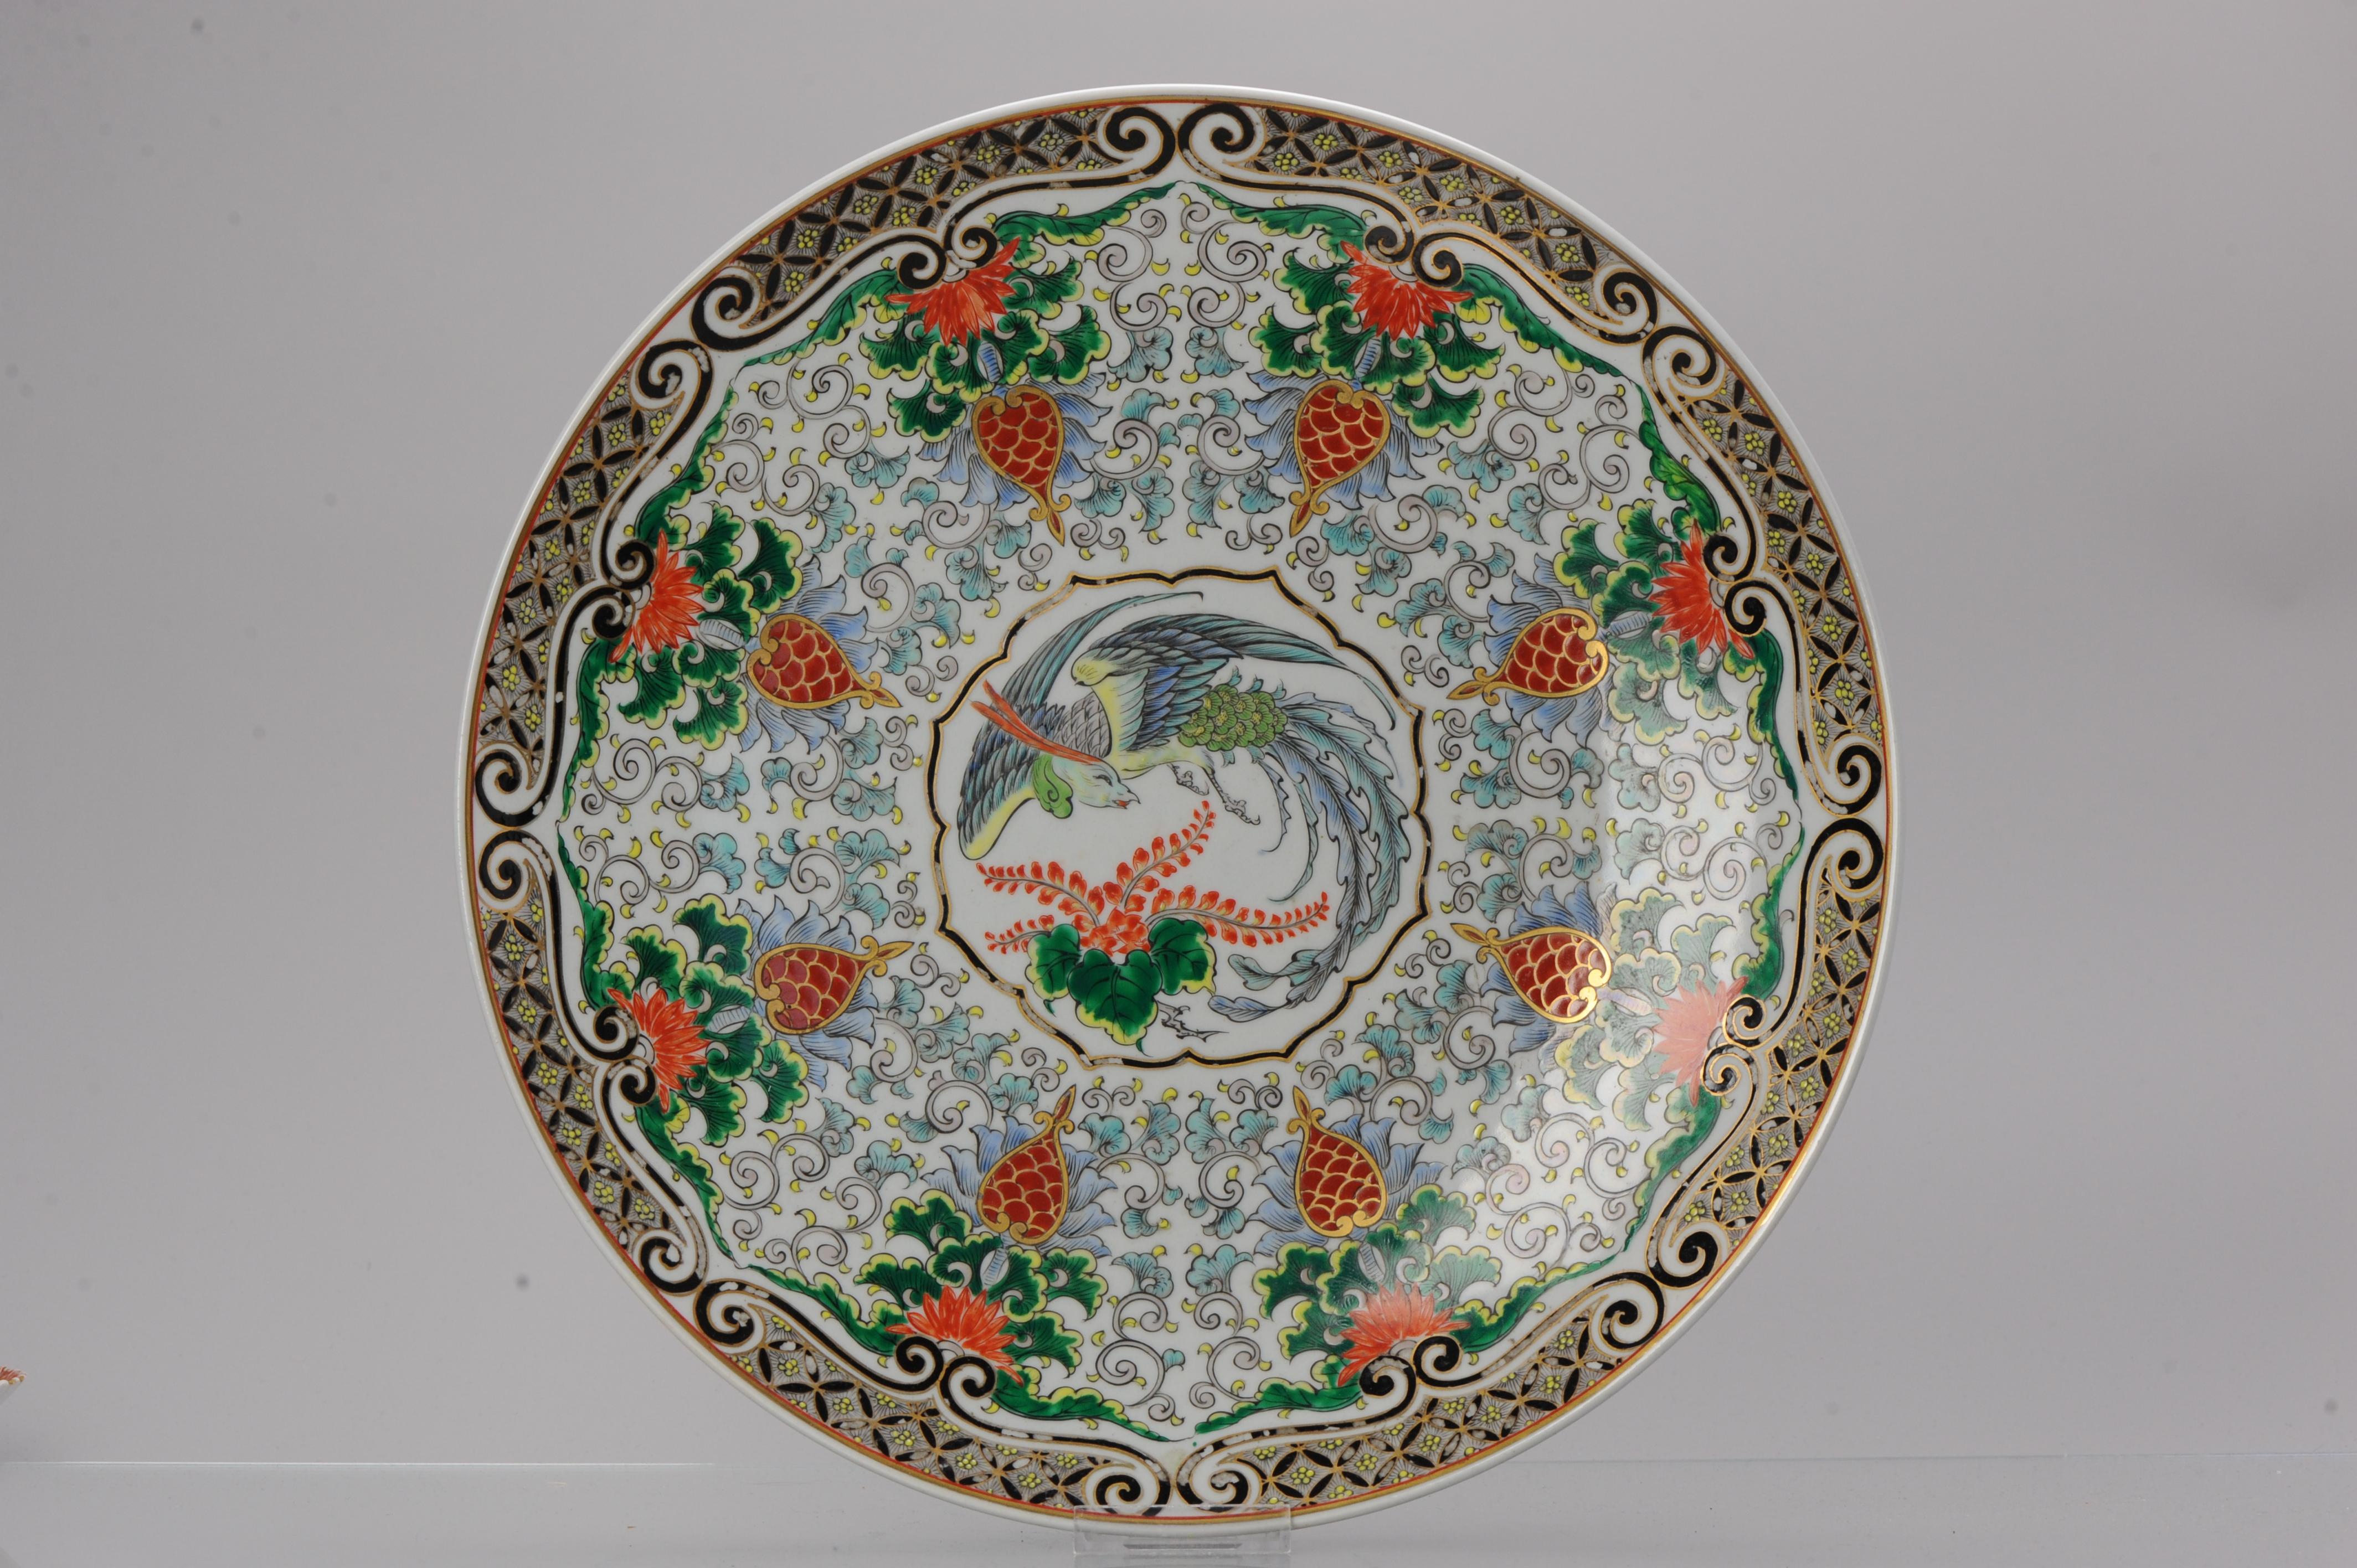 Description

A very nicely decorated plate.

Marked at base

Condition
Perfect. Size: 413 x 57 mm DXH

Period
20th Centurry